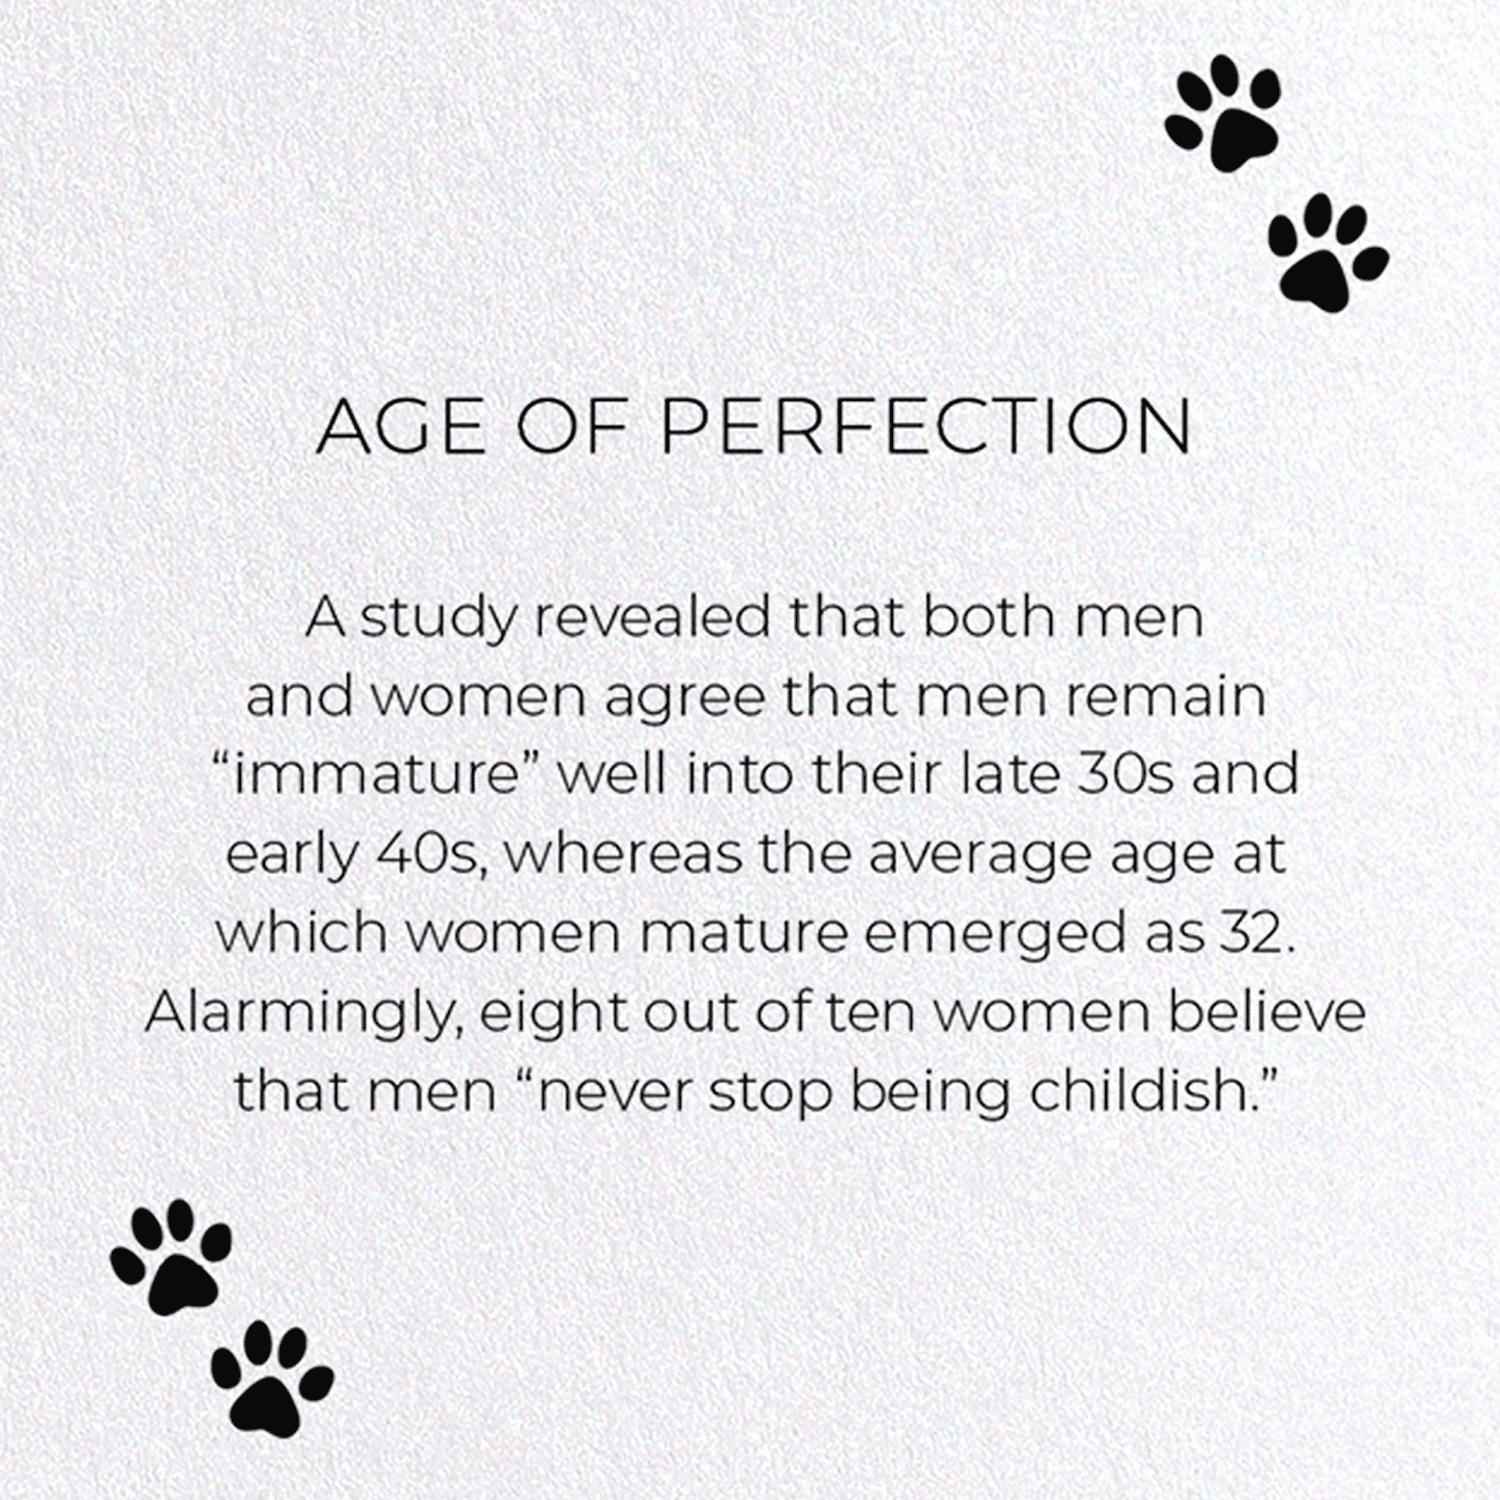 AGE OF PERFECTION: Funny Animal Greeting Card